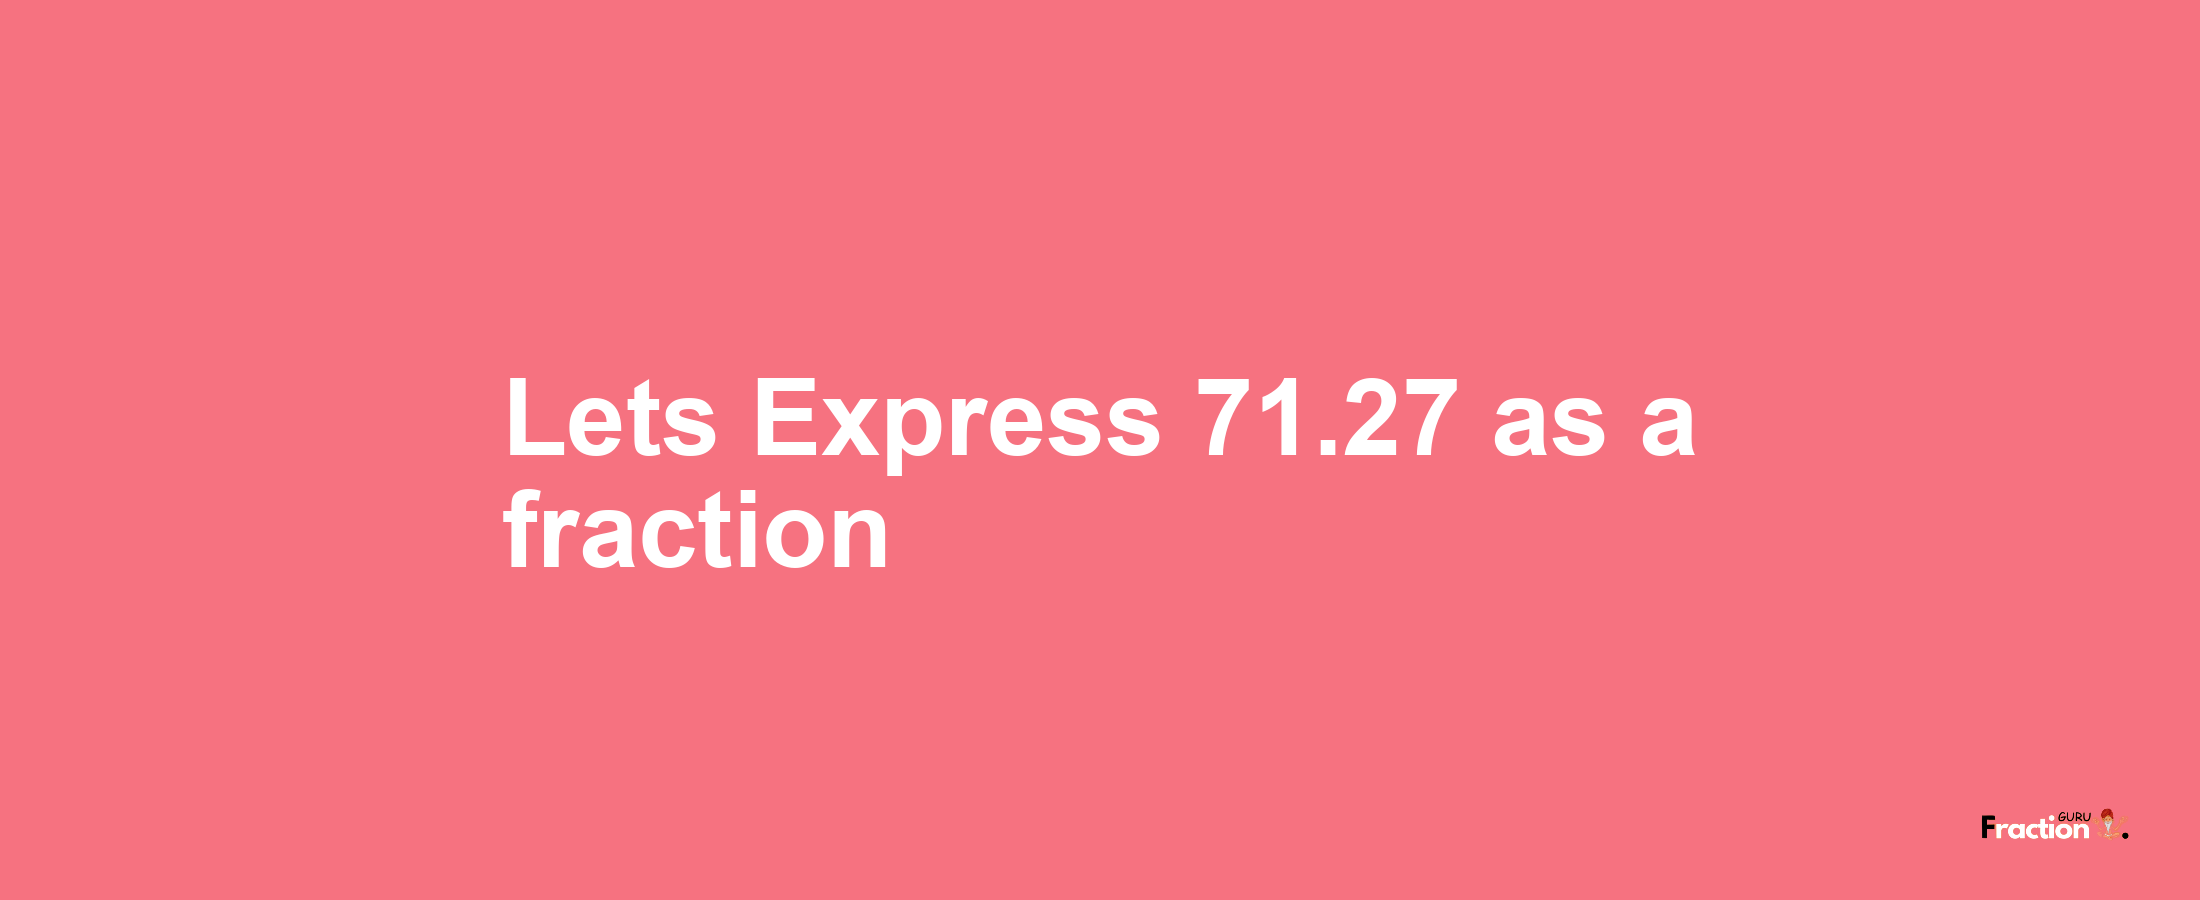 Lets Express 71.27 as afraction